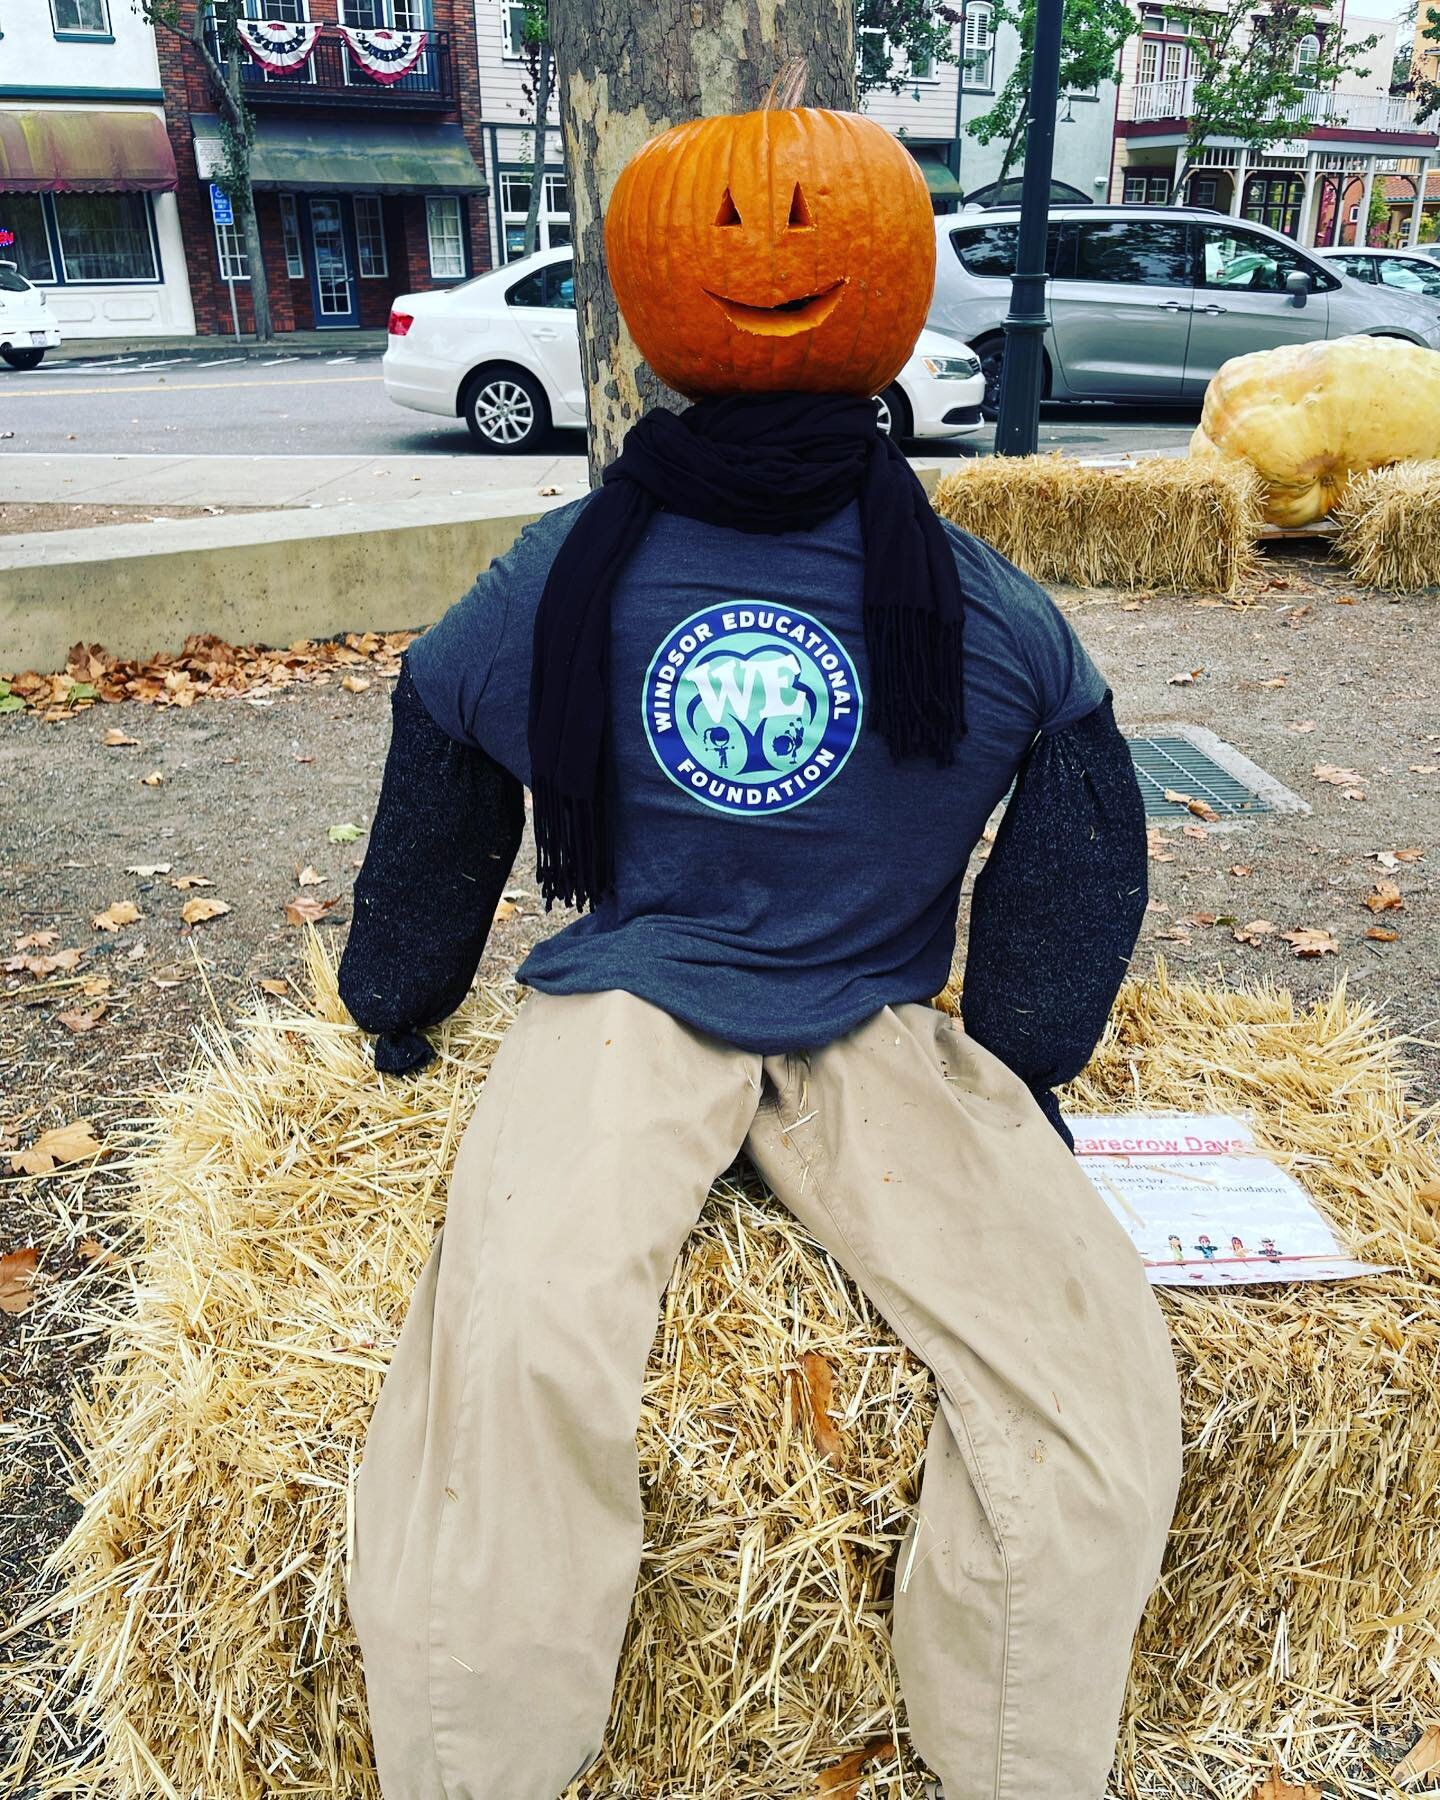 Scarecrows are here,  and the festivities begin. Exited to see these in the town again.

#scarecrowdaysonthegreen #windsortown #windsortowngreen #onthegreen #windsoreducationalfoundation #wefoundation